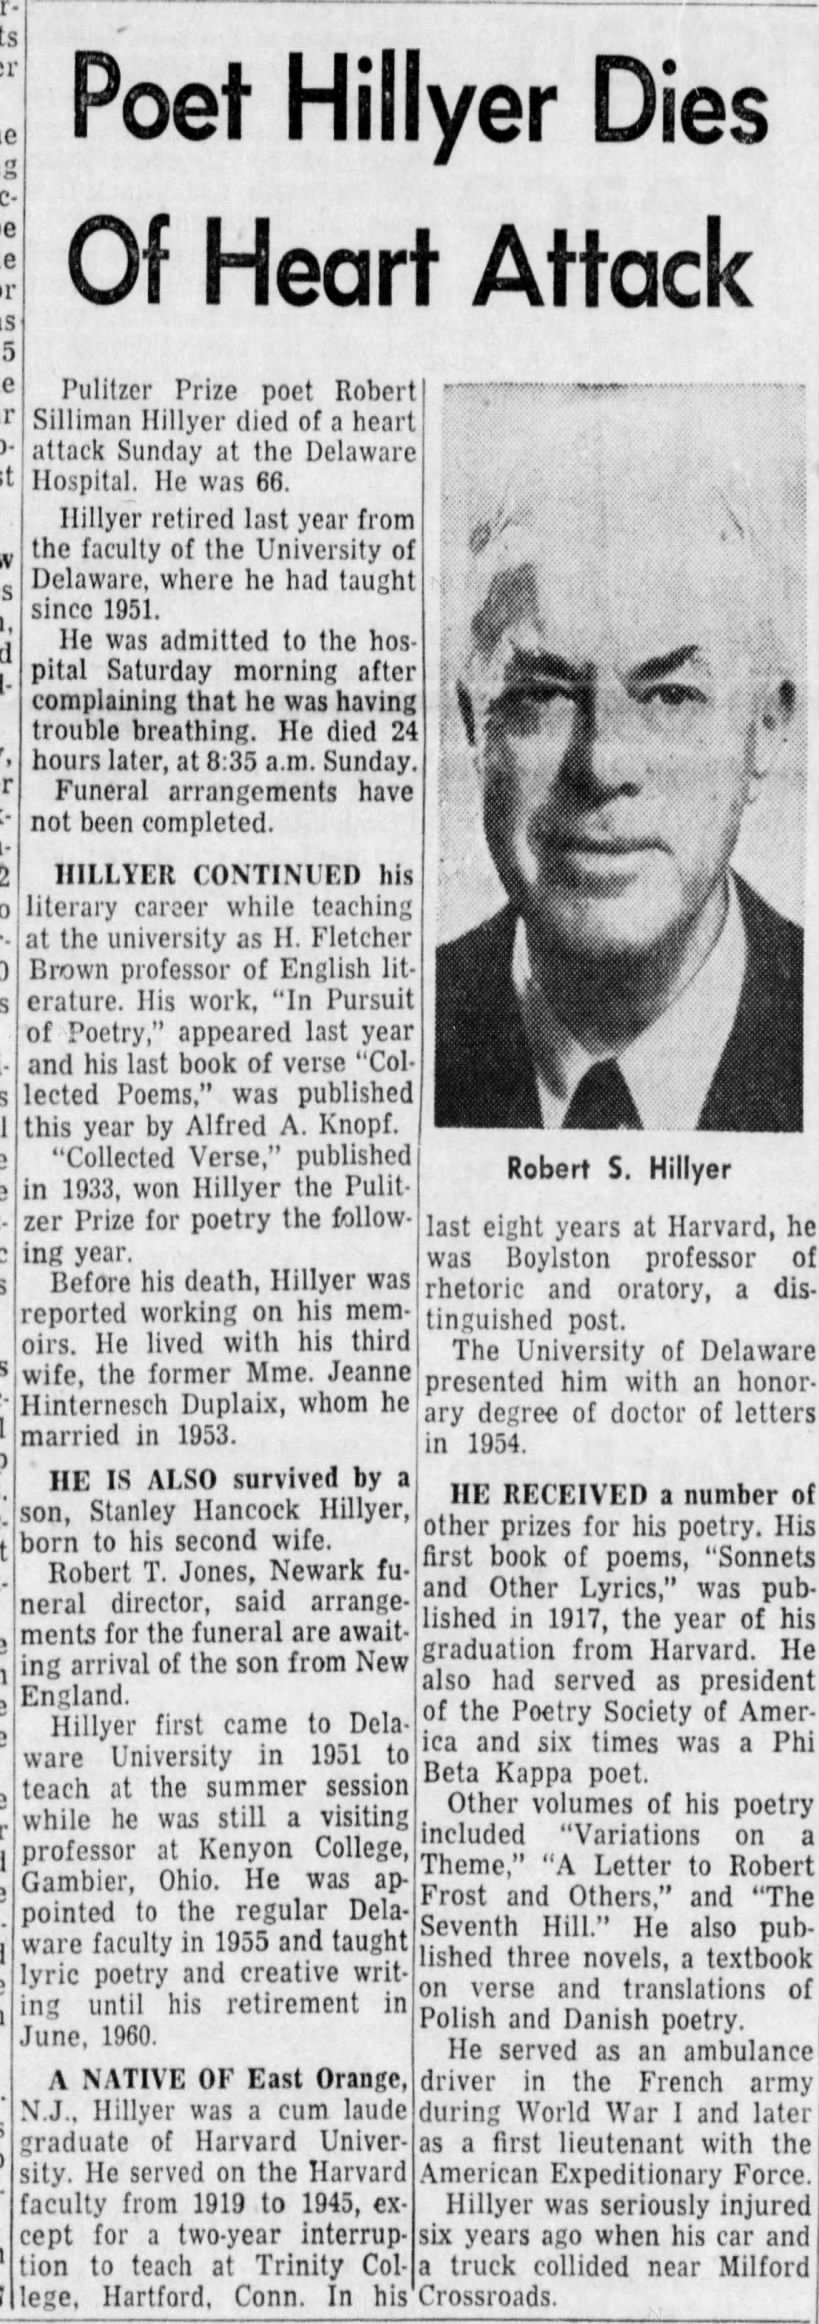 The Morning News (Wilmington, Delaware)
26 Dec 1961, Tue
Page 1